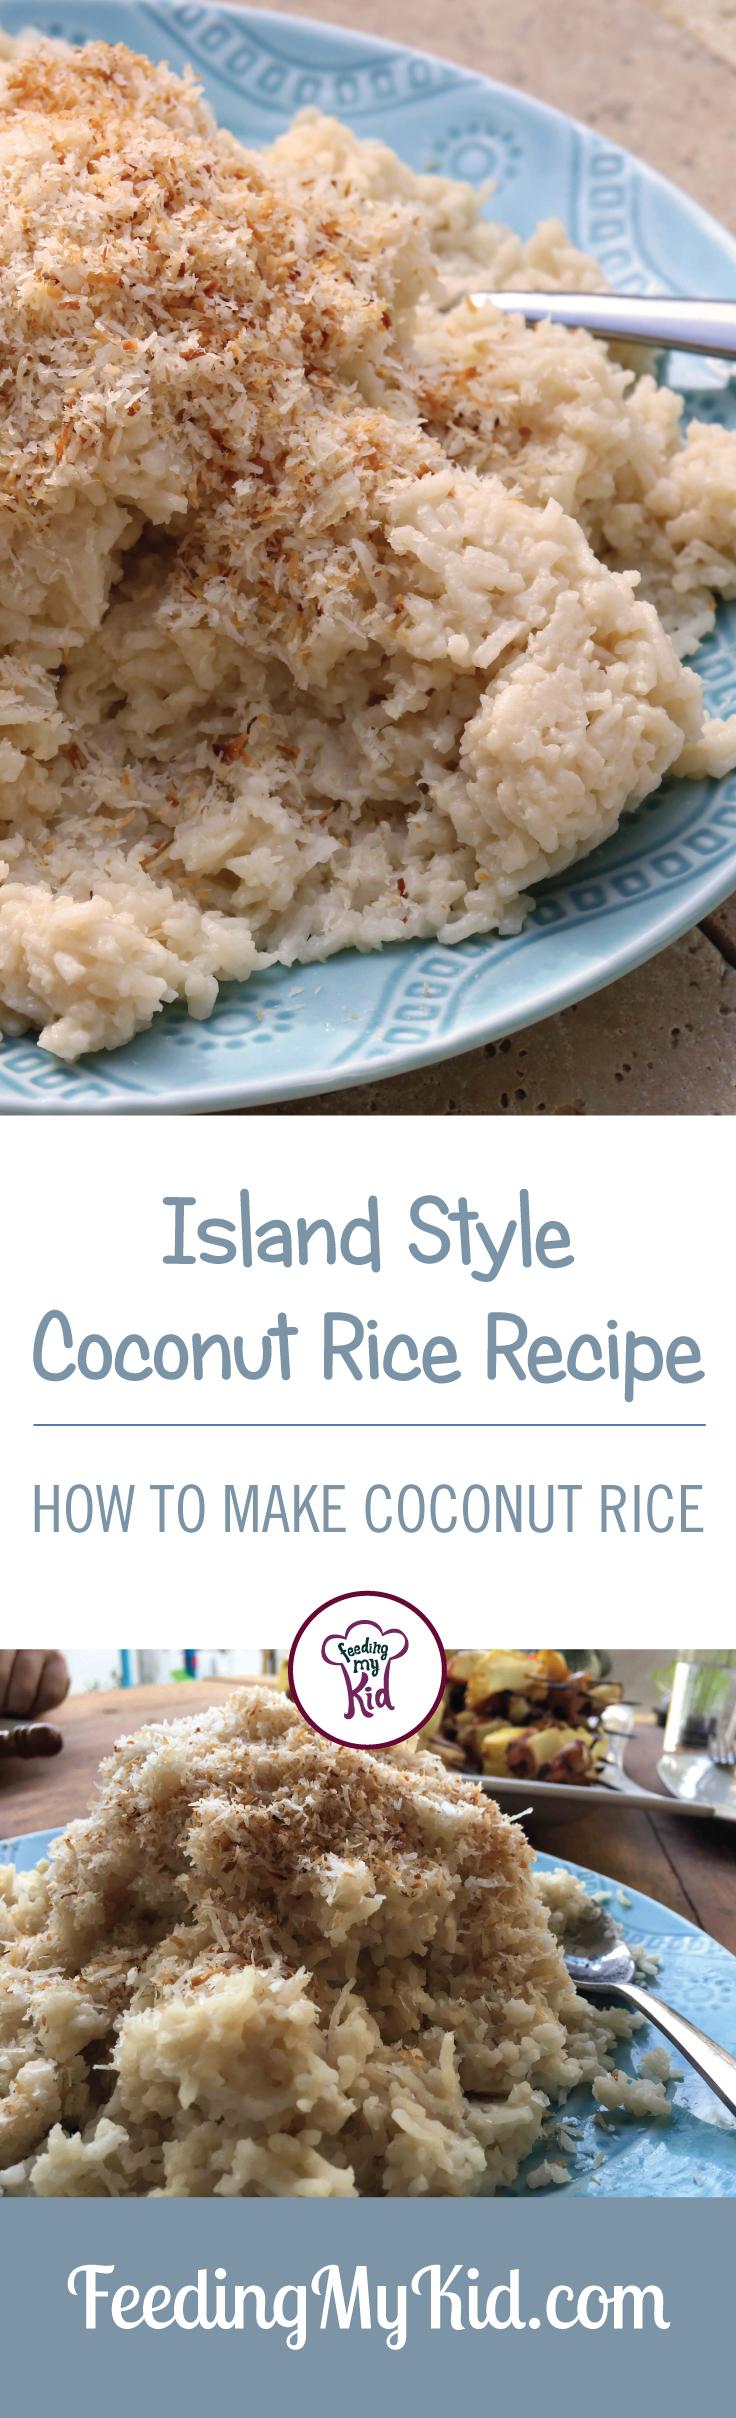 Coconut Rice Recipe [Find out how to make Coconut Rice]